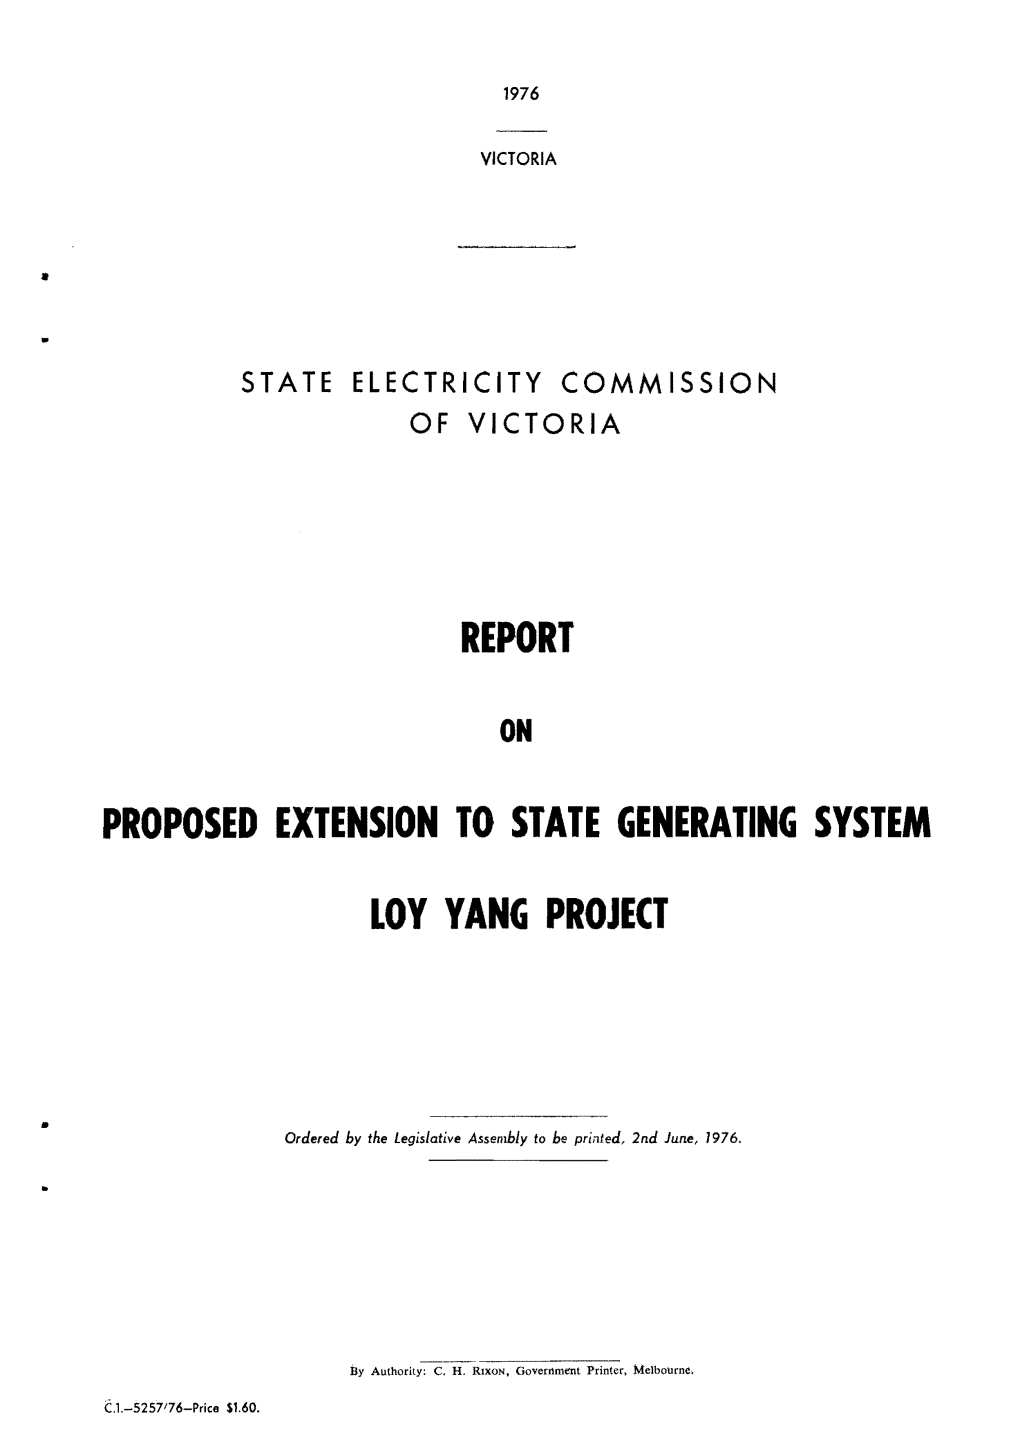 Report Proposed Extension to State Generating System